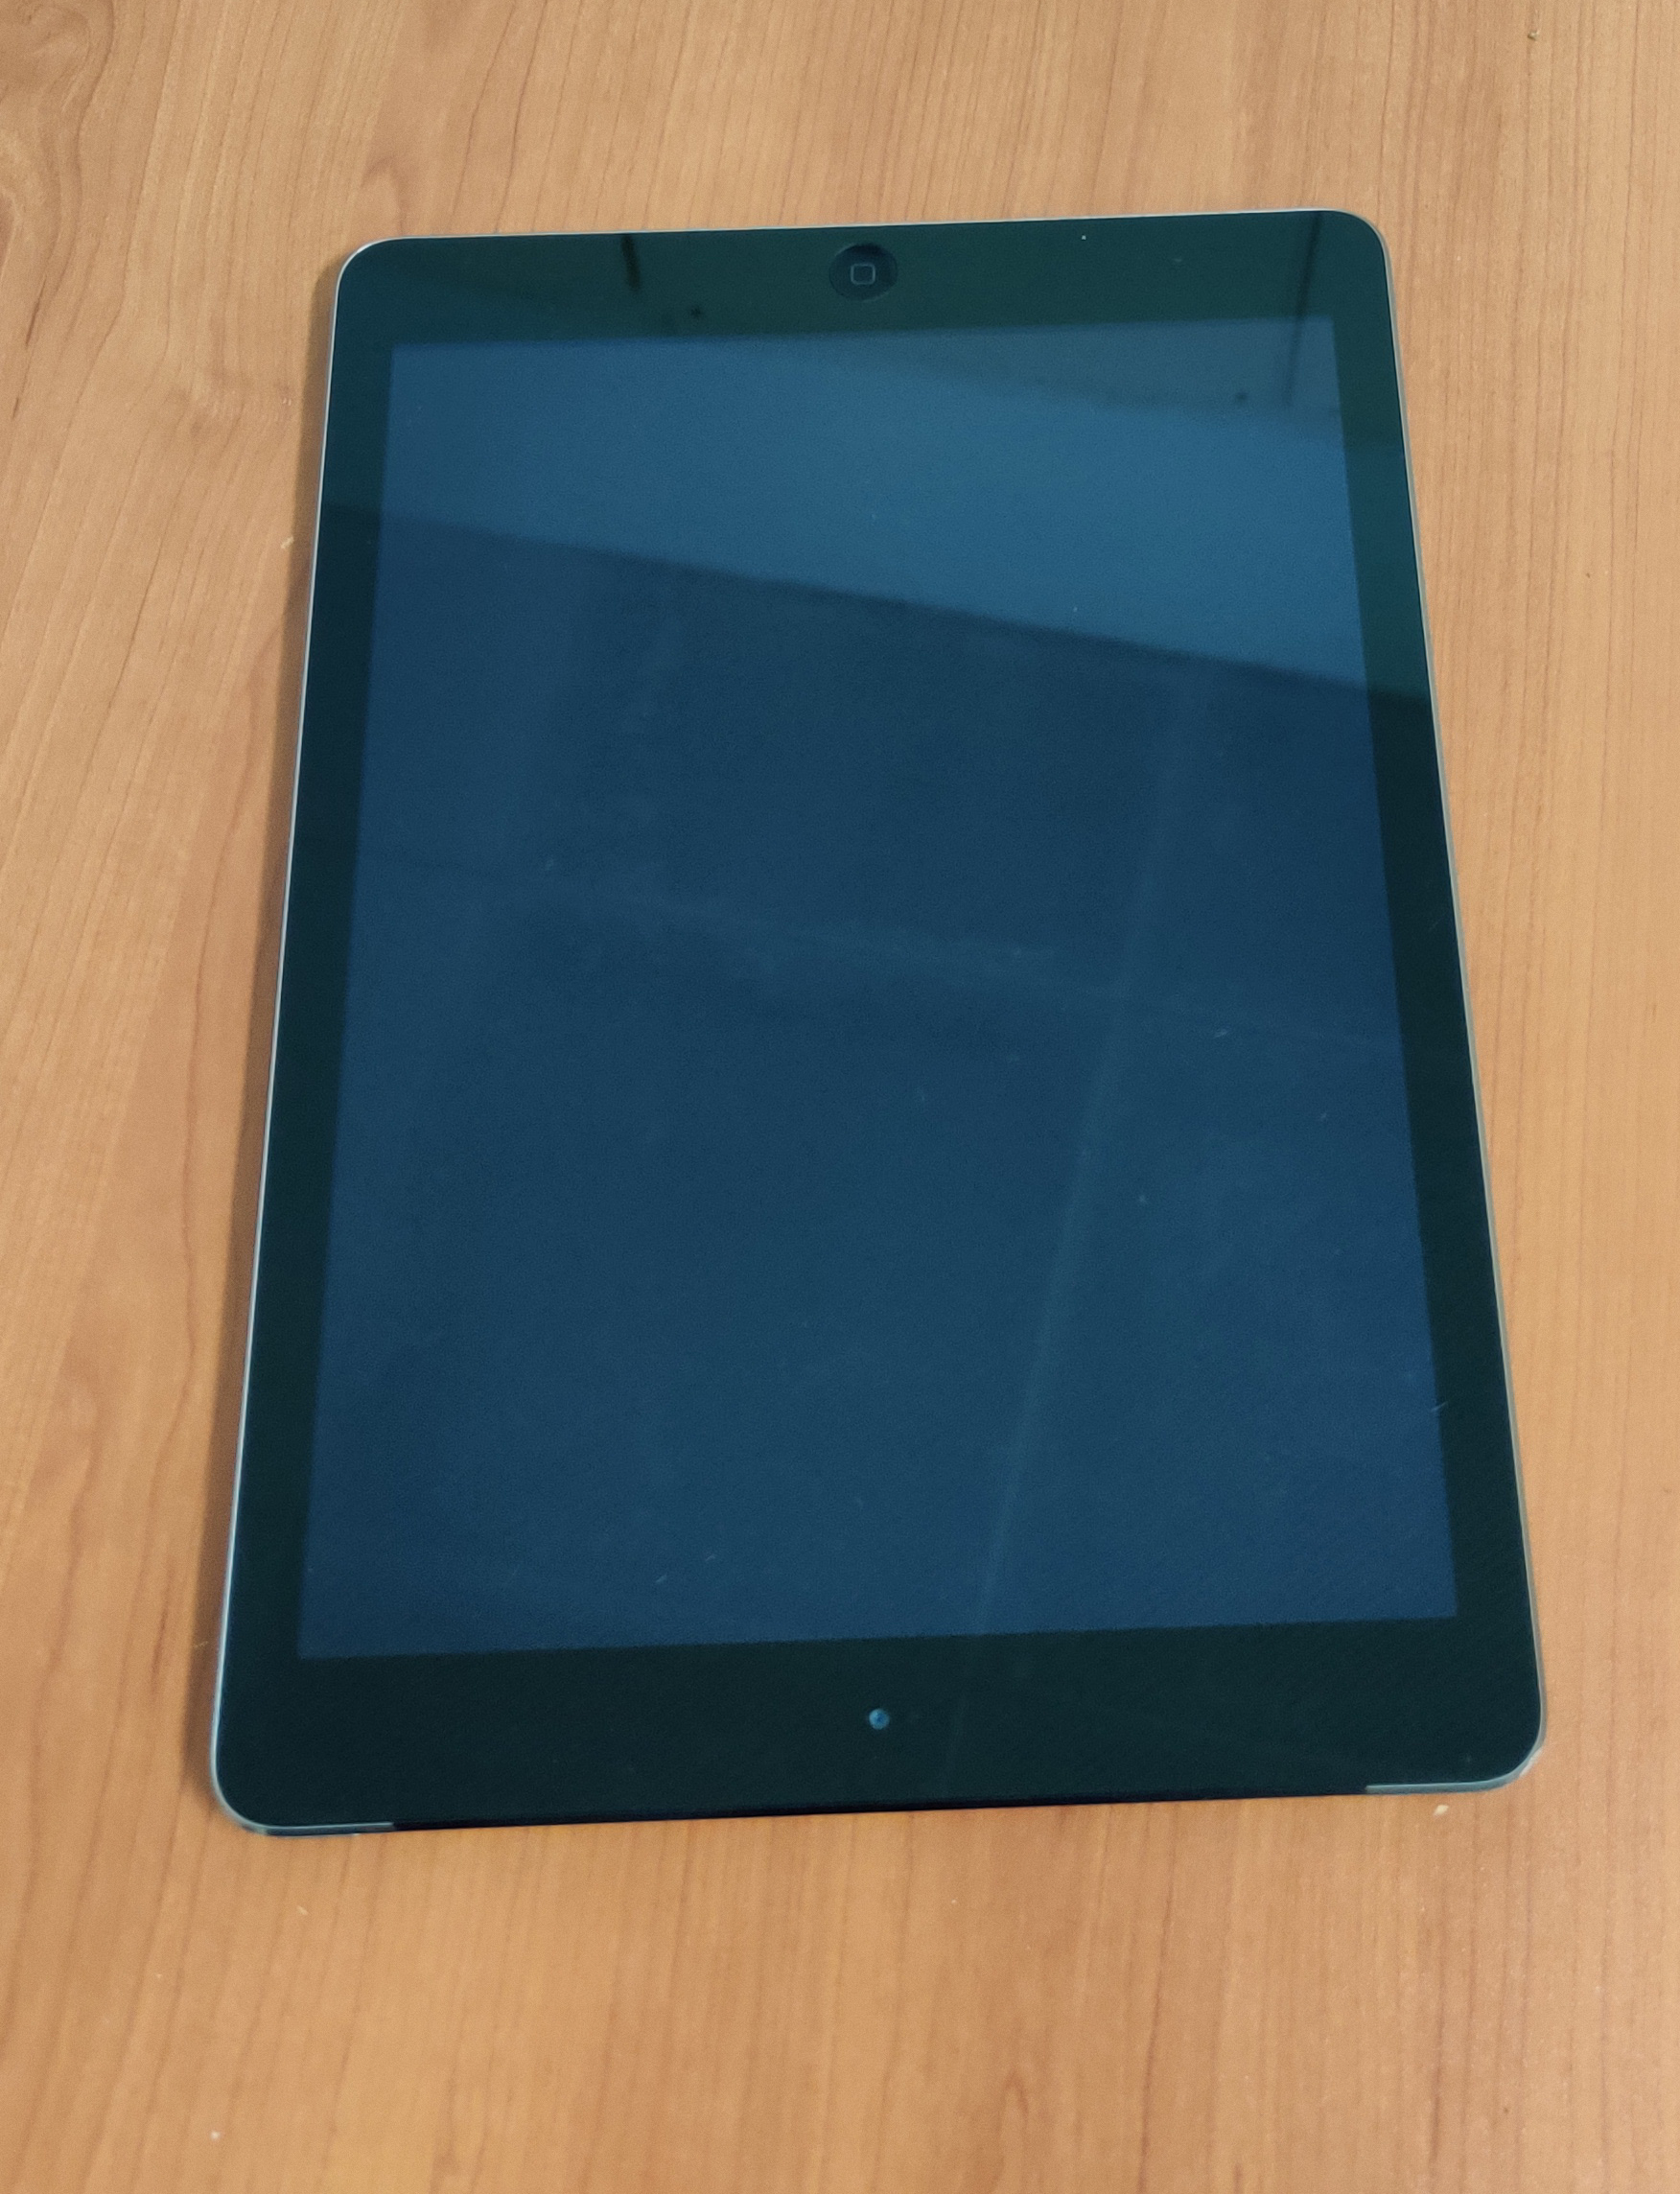 [Sale] - iPad Air 1 16GB wi-fi and cellular | Tablets | Carbonite